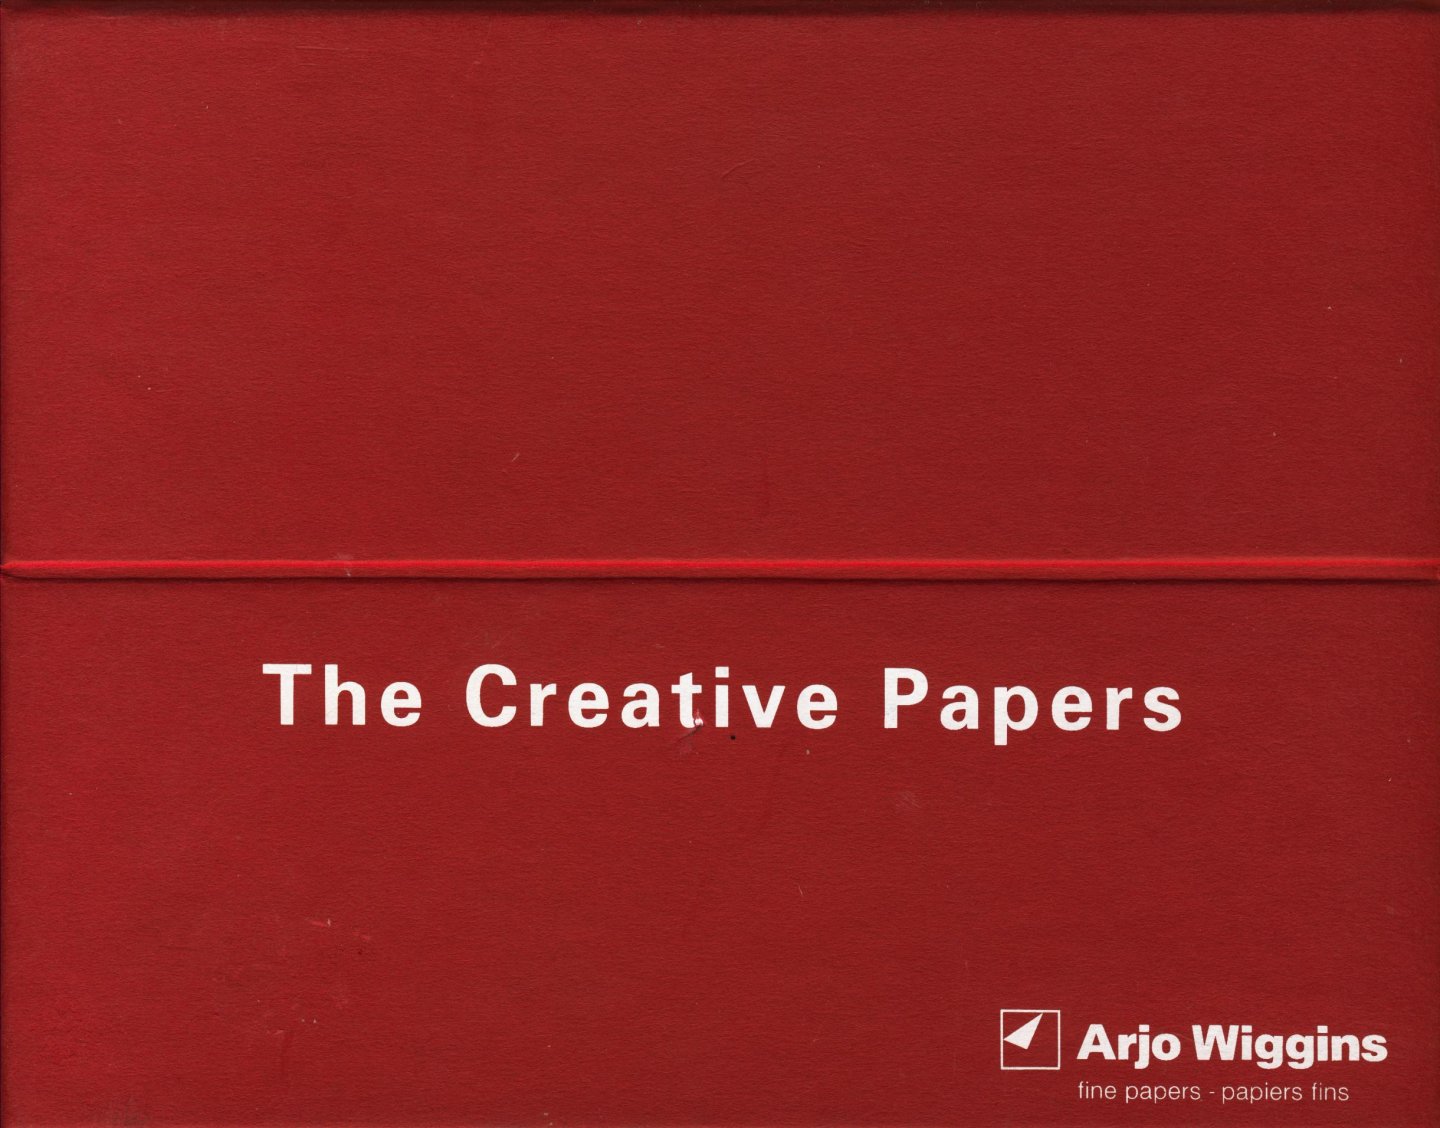 Arjo Wiggins - The Creative Papers